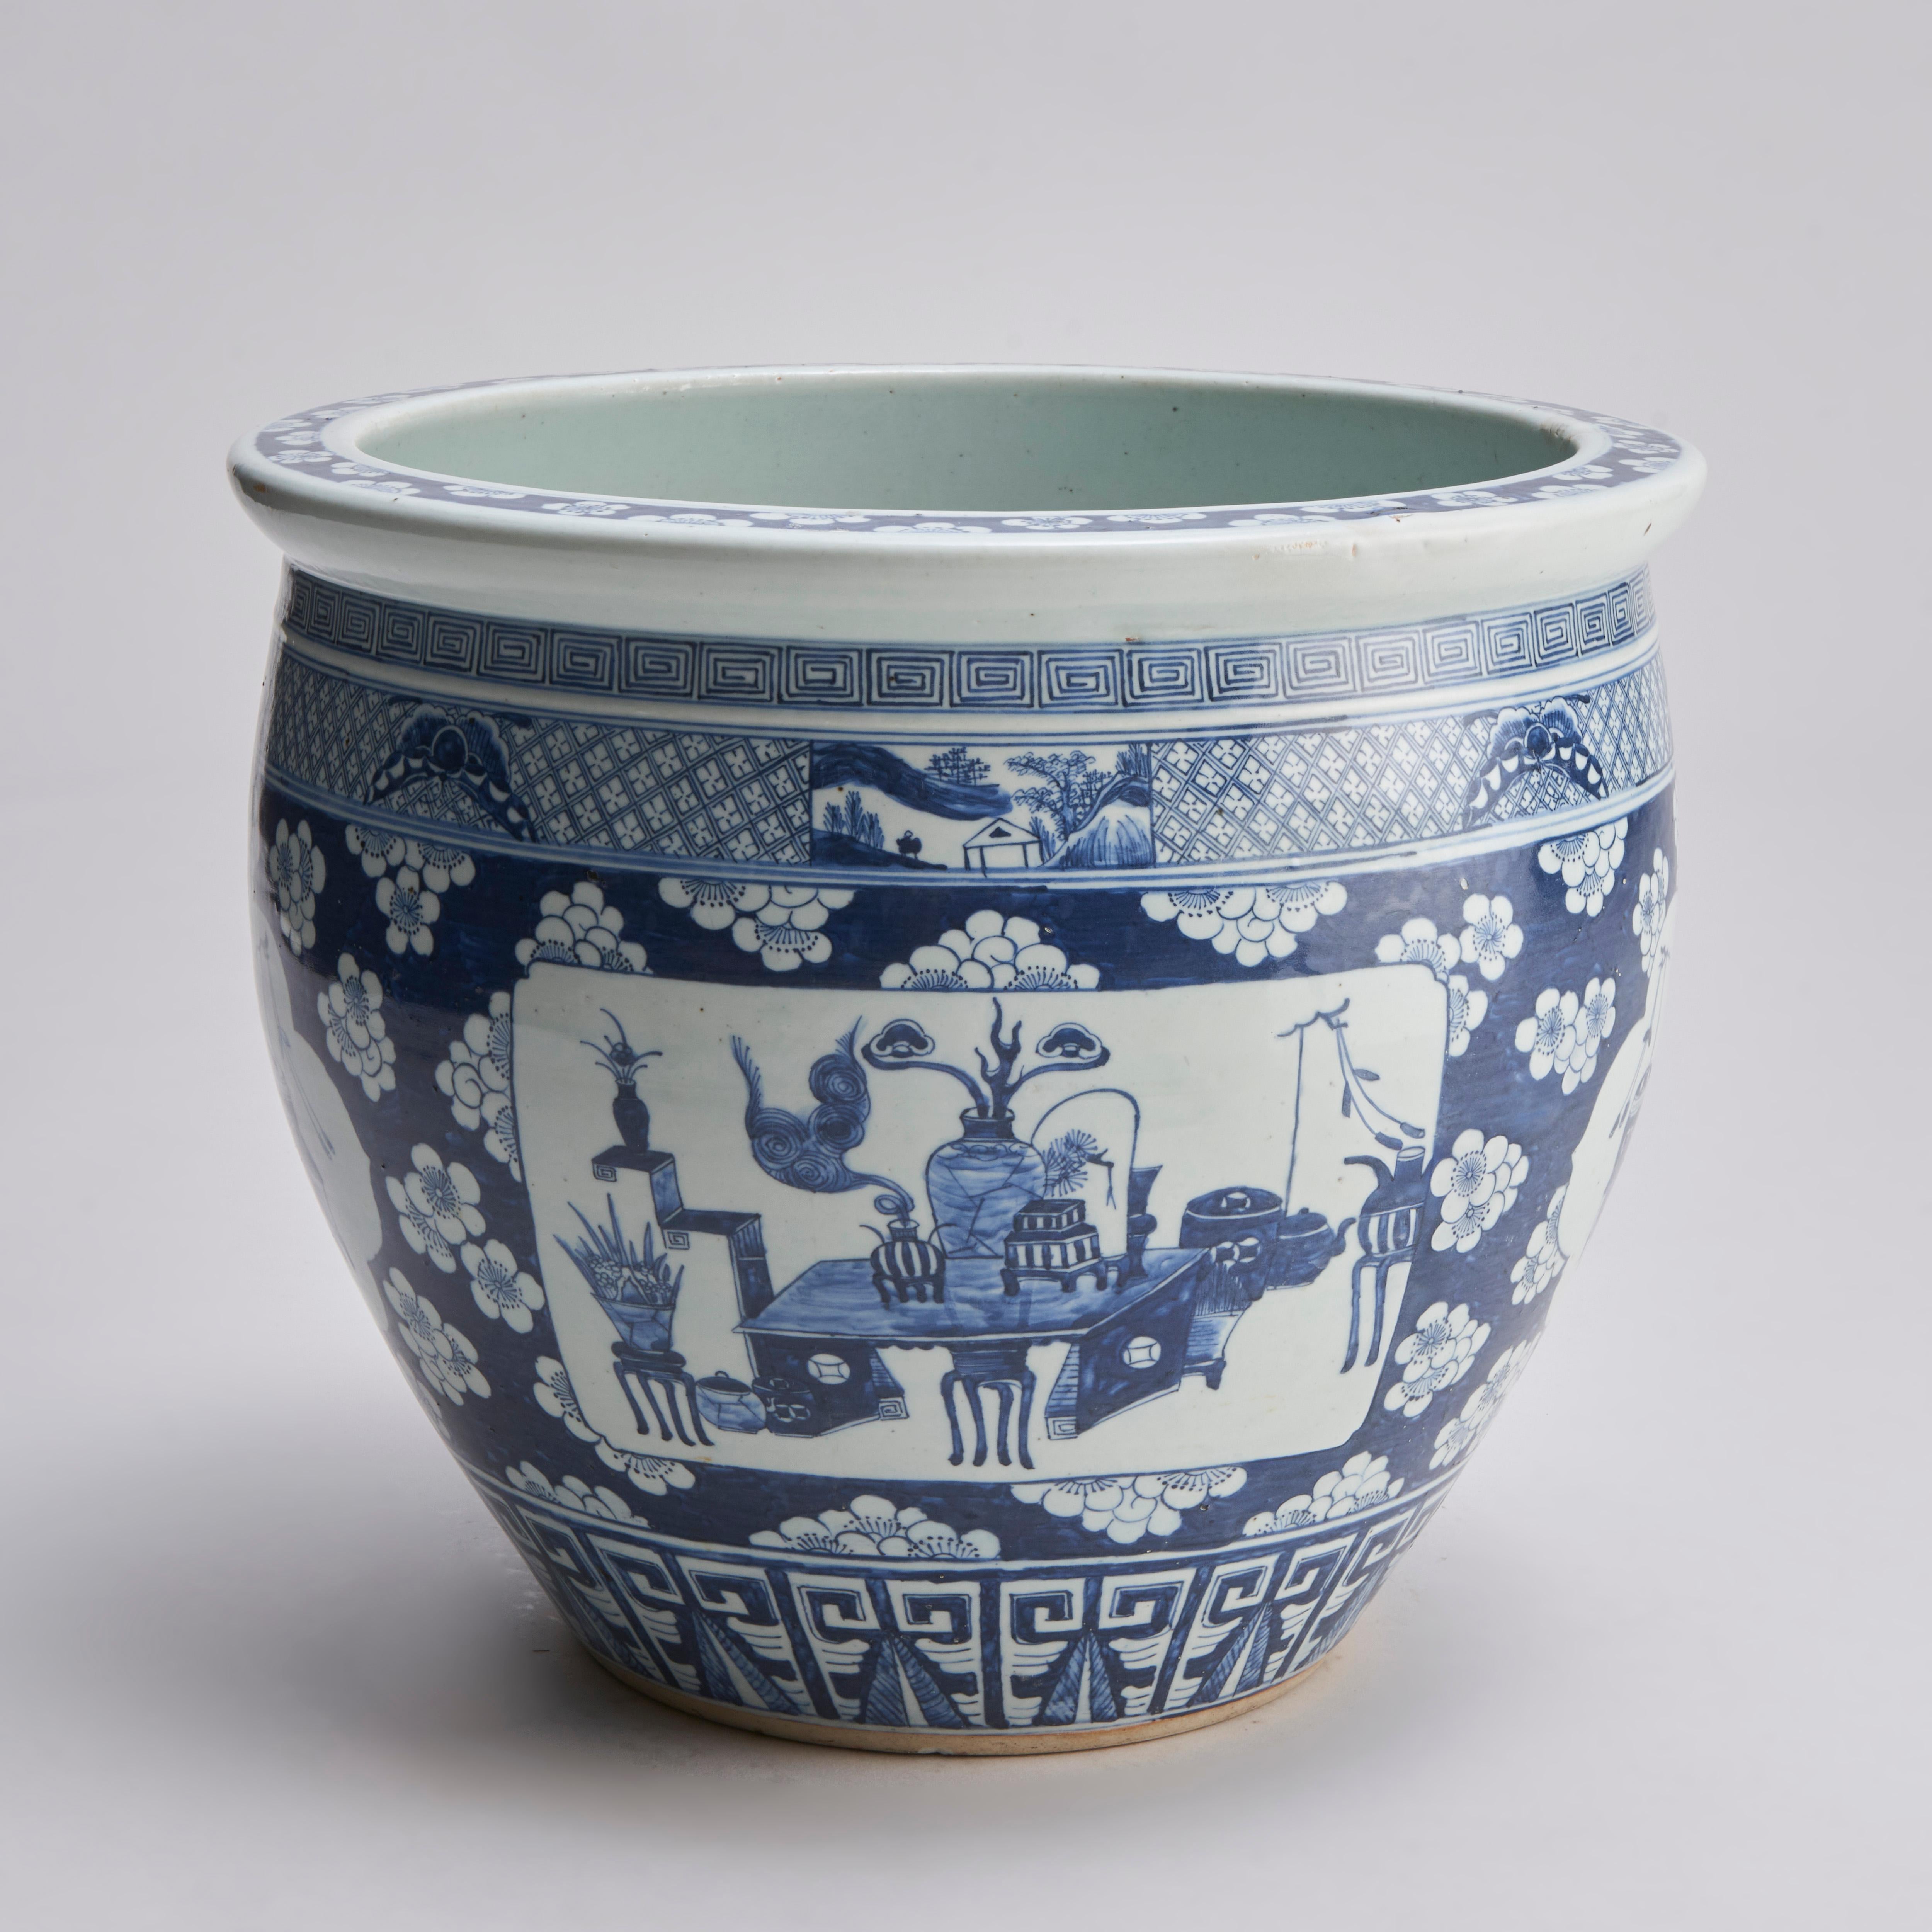 A large 19th century Chinese blue and white jardinere / fish bowl with dark blue decoration of panels of scholarly items and simple landscape scenes on a prunus ground with a meandering top border and a phoenix tail pattern to the foot.

The rim of